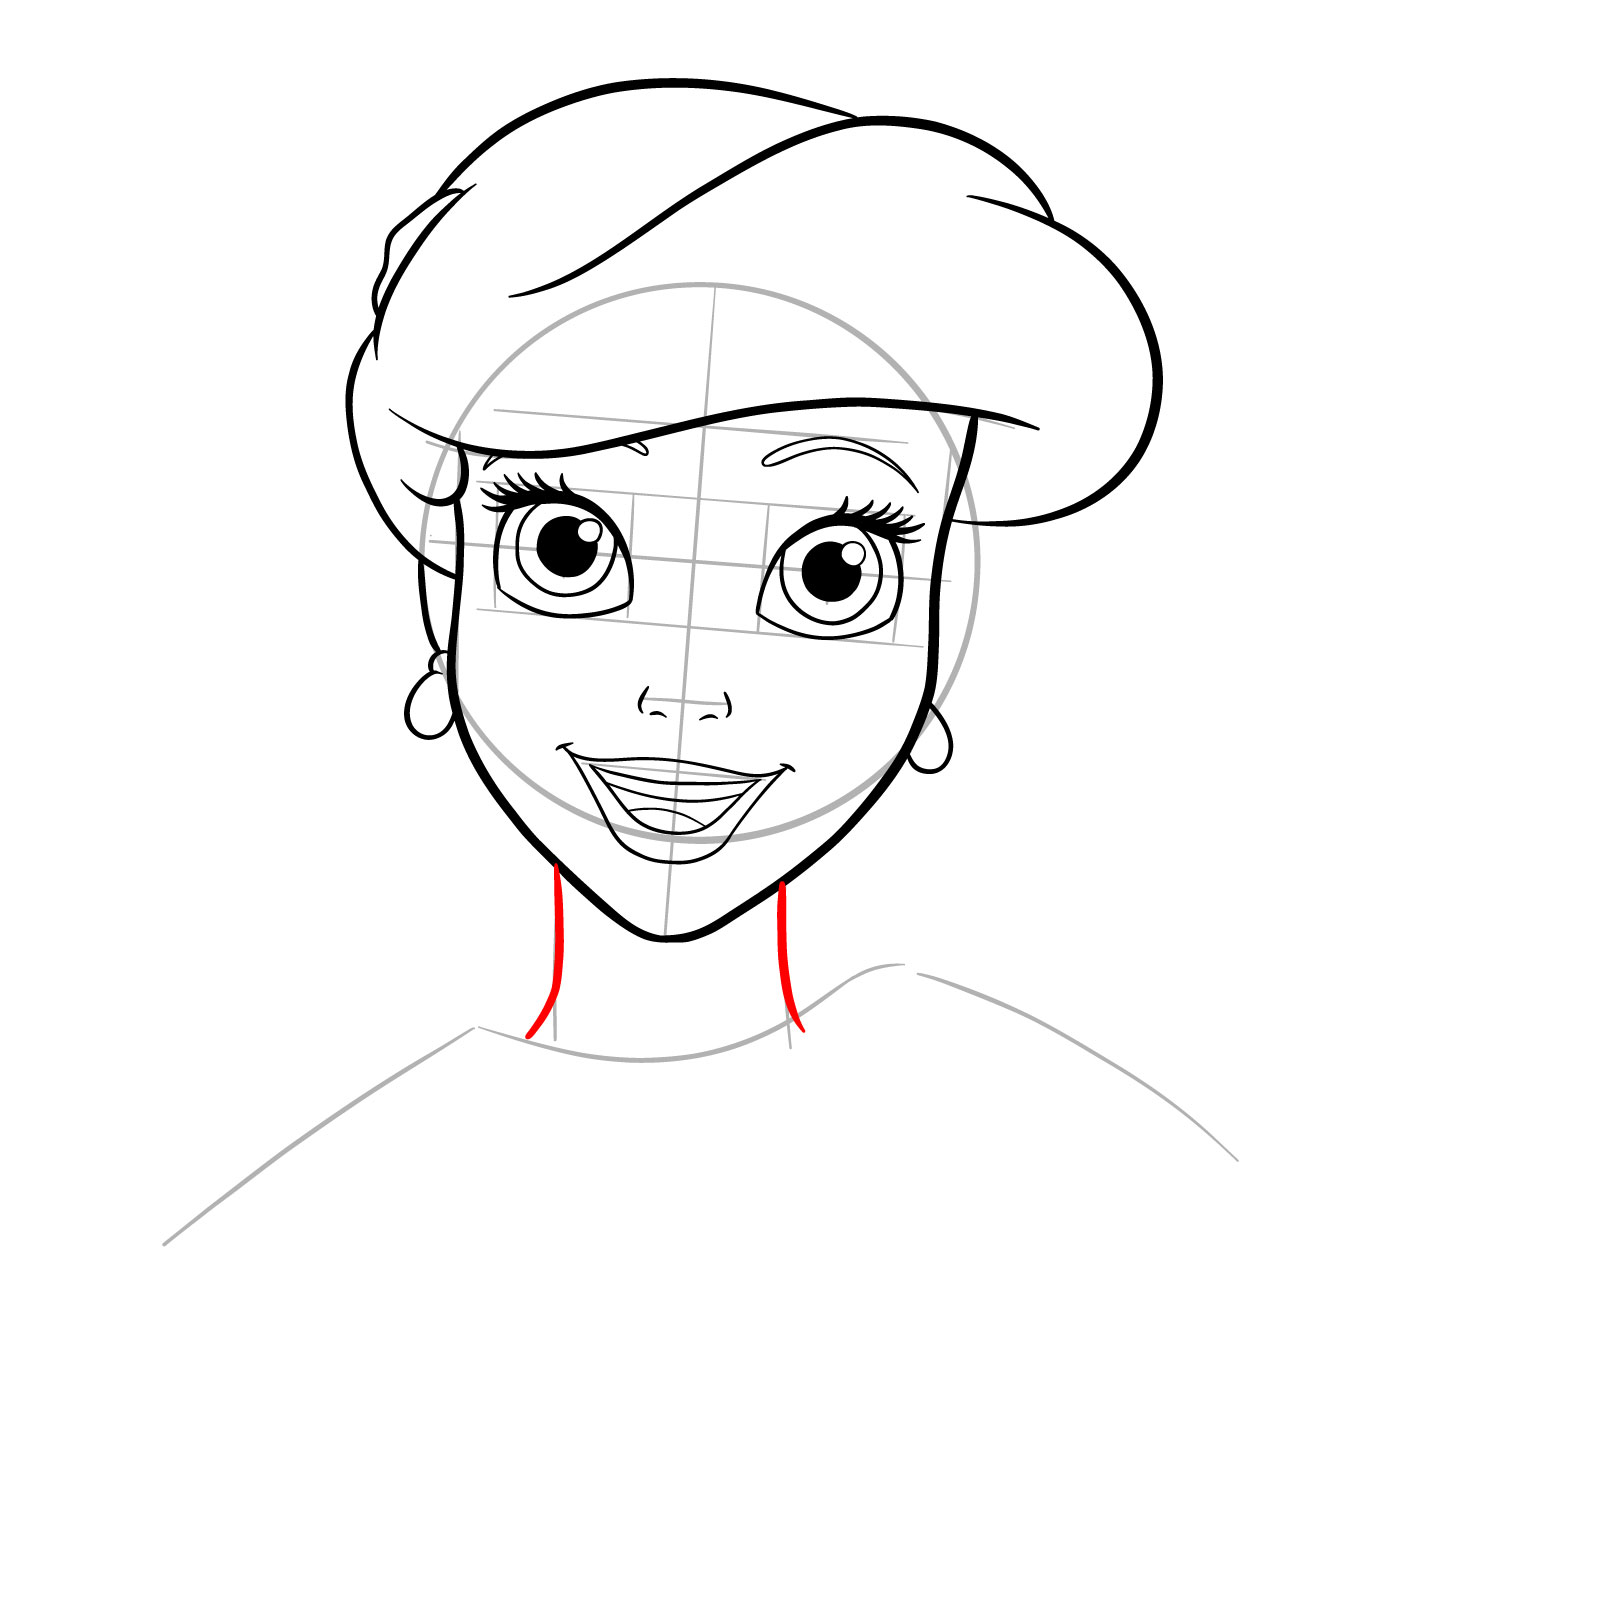 How to draw Ariel's face - The Little Mermaid - step 23